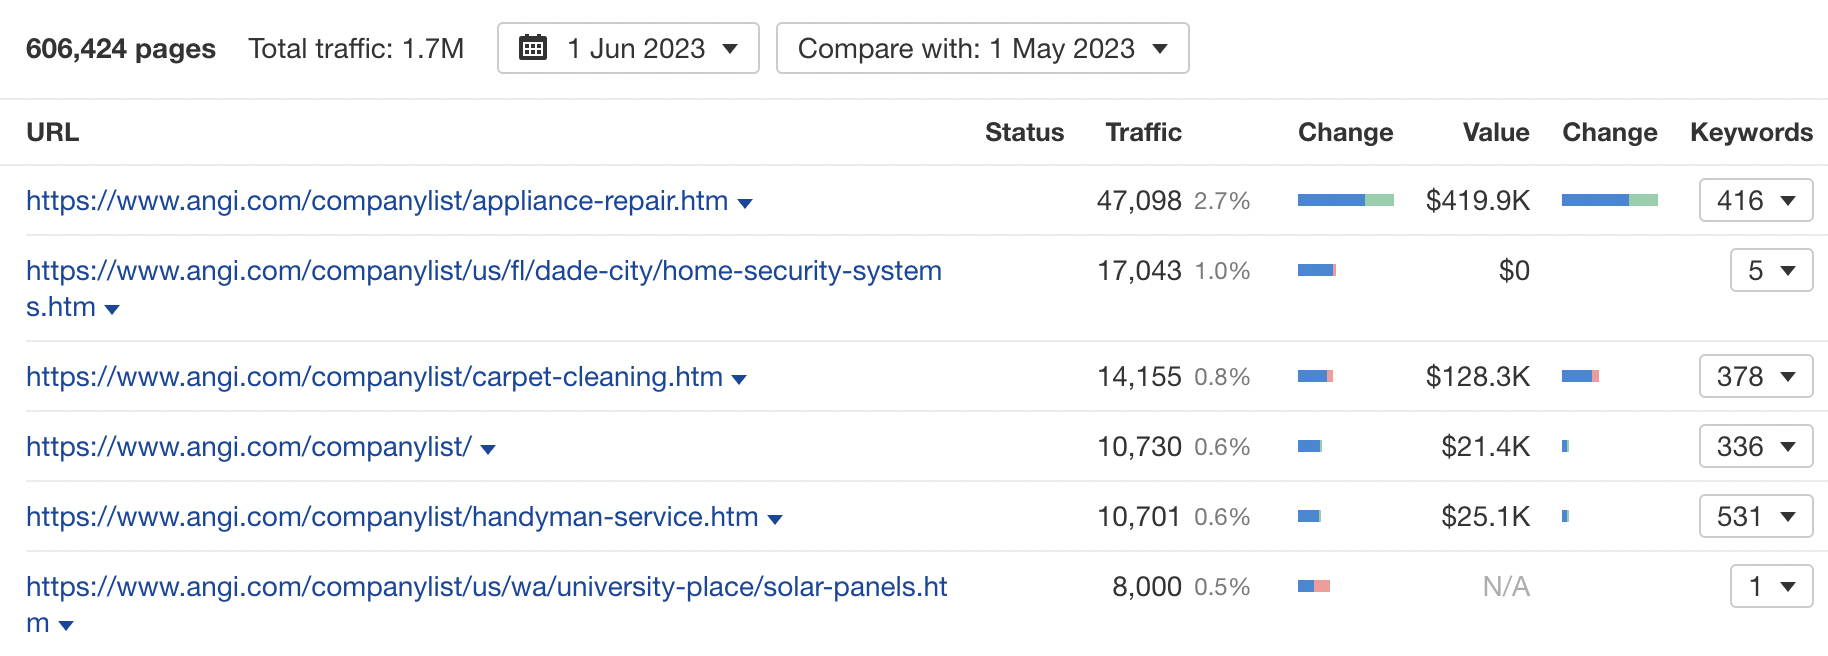 Traffic results for a portion of the available home service categories in Angi's company list folder